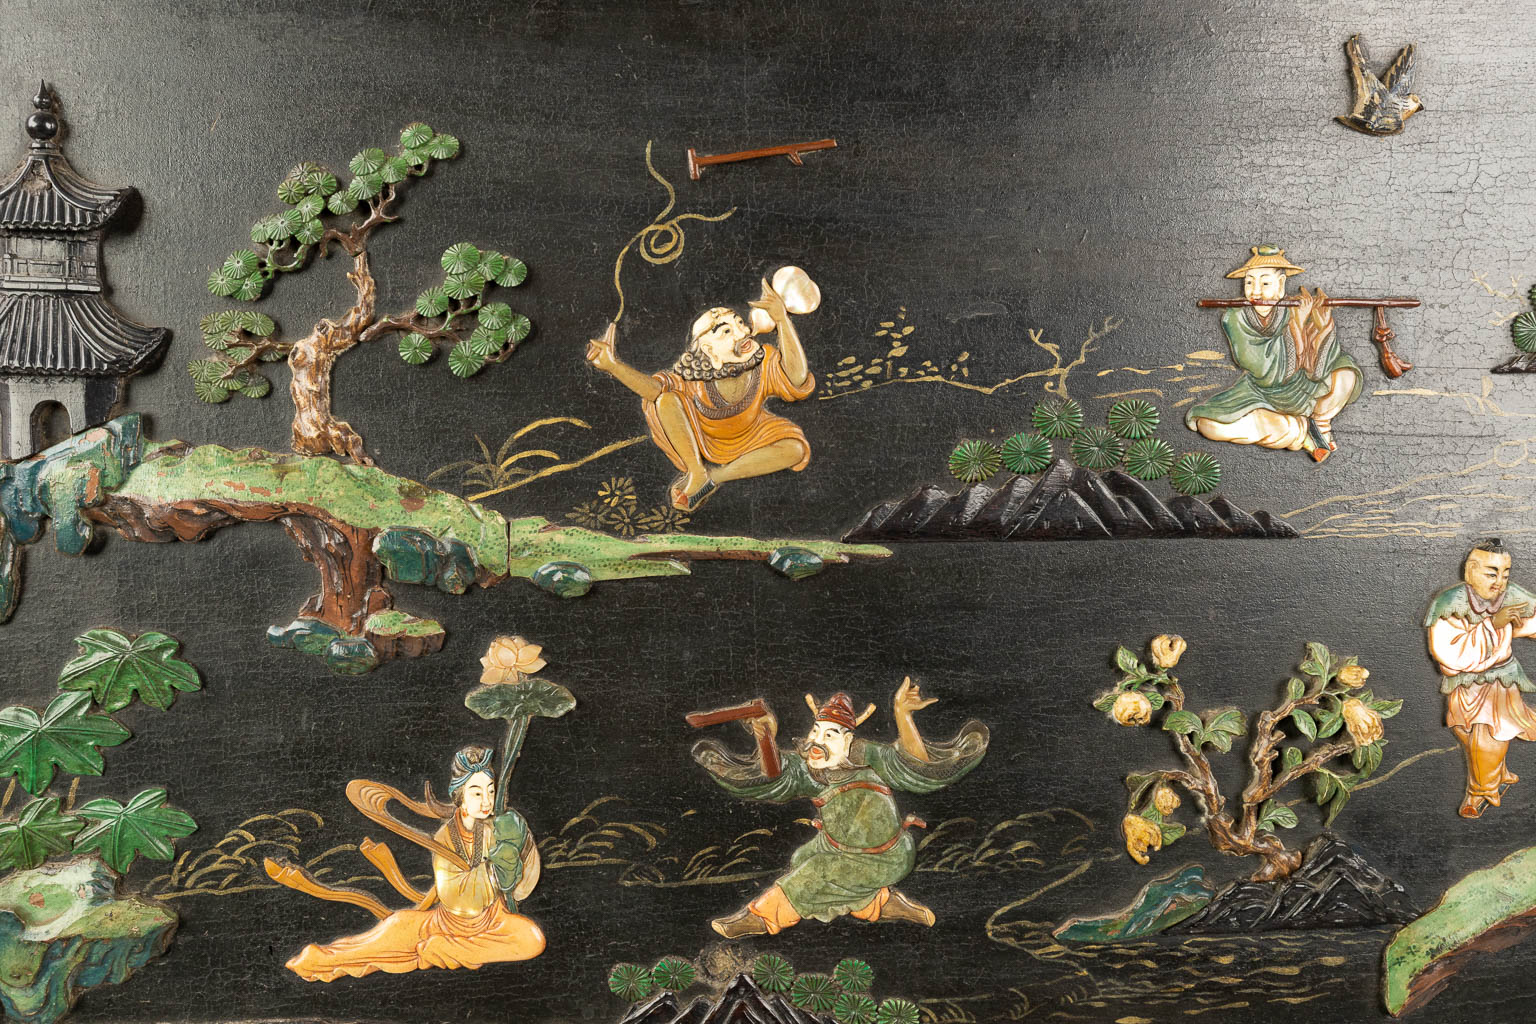 A Chinese sculptured table screen with images of the 8 immortals, cranes, deer and pine trees. (H:80cm)